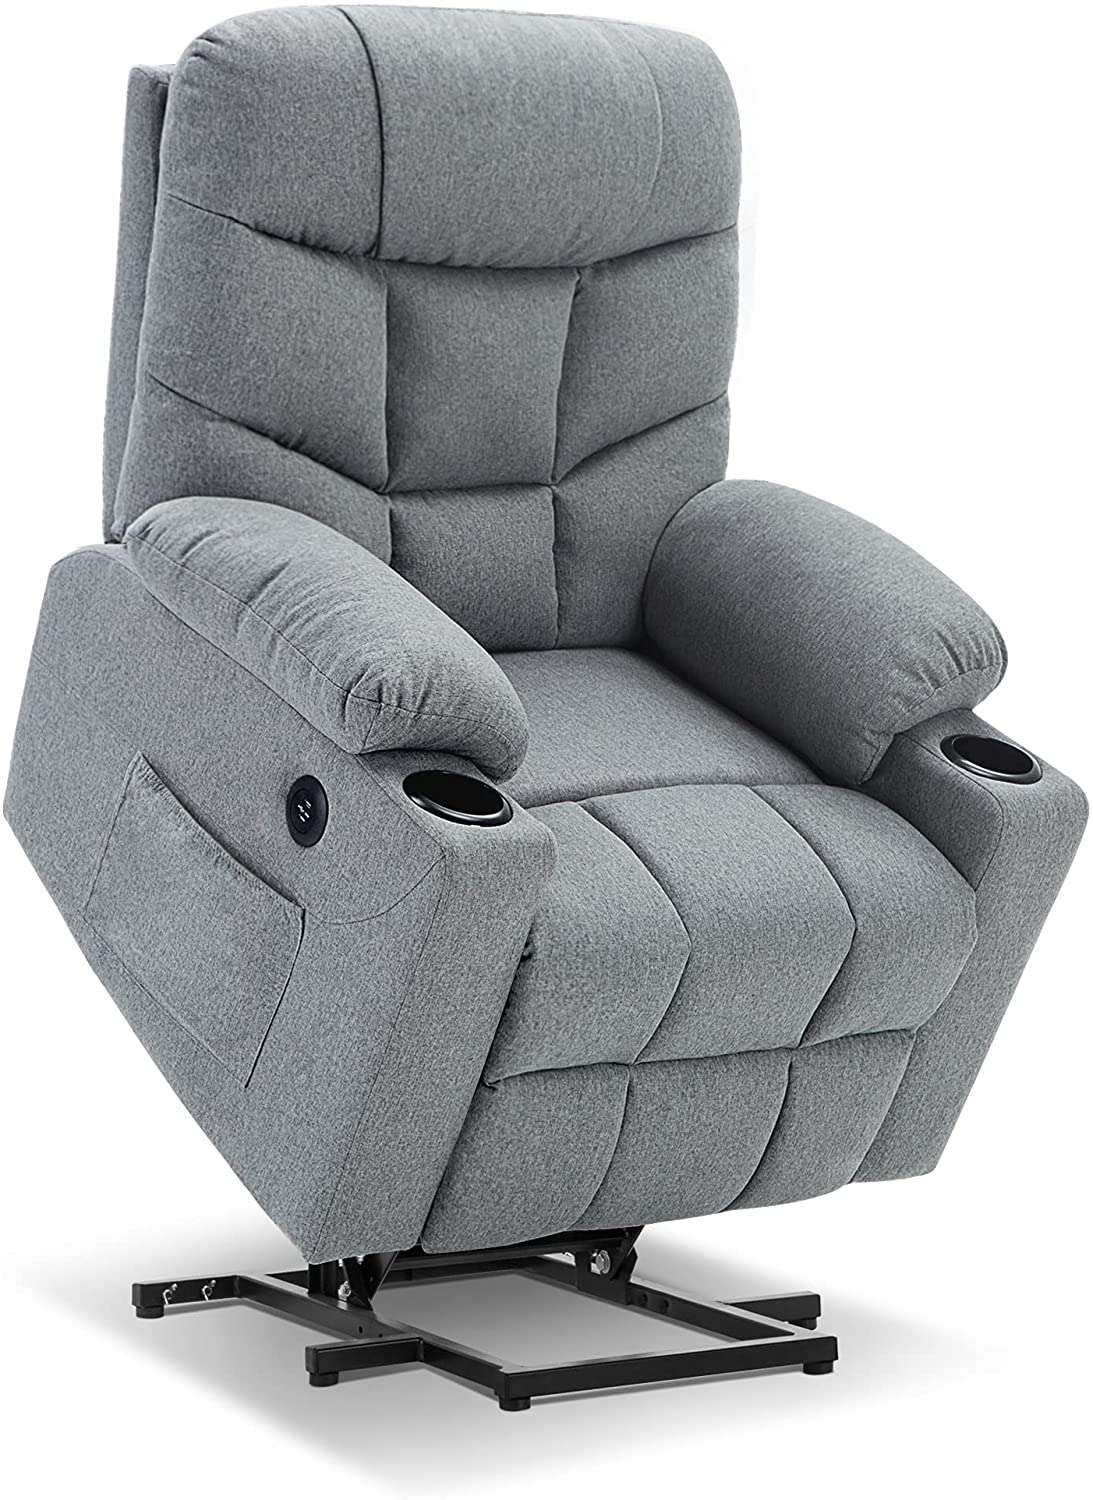 mcombo electric power lift recliner chair sofa for elderly